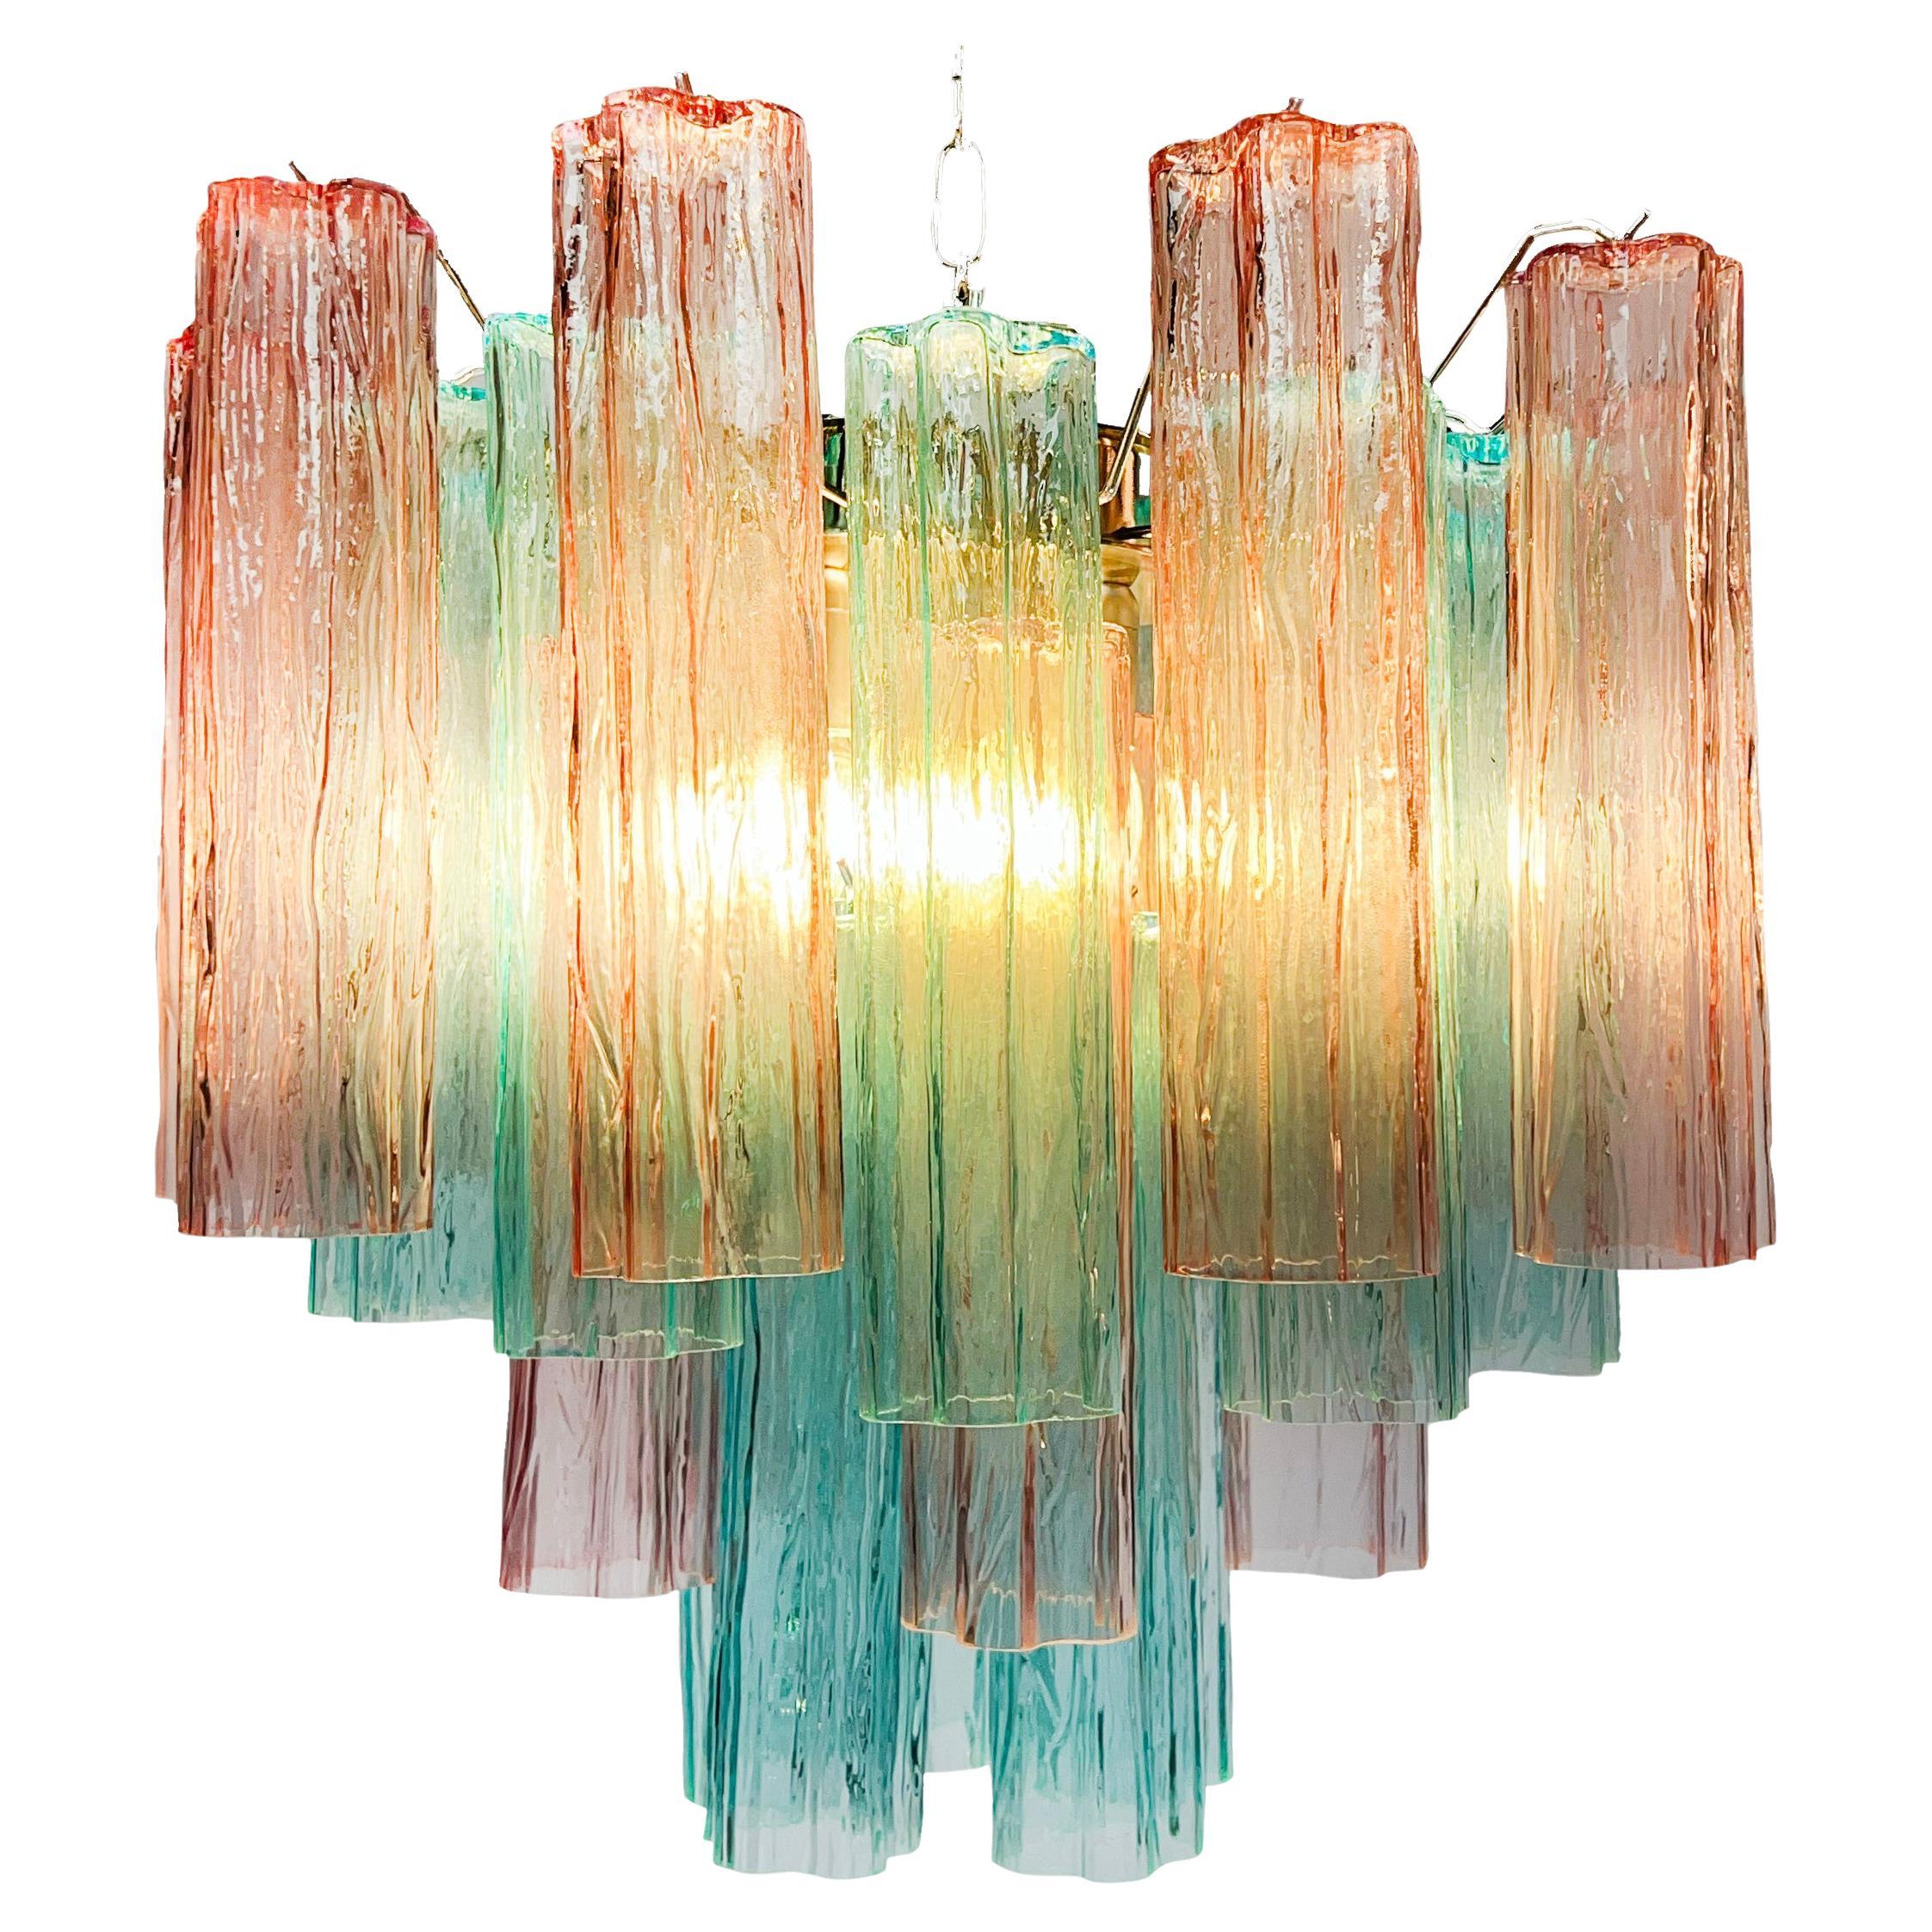 Fascinating Murano chandeliers. It is composed of 30 star-shaped panes of pure Murano glass. The height is adjustable according to the height of the ceiling. At no extra cost we will replace the original lamp holders with those in use in the USA.